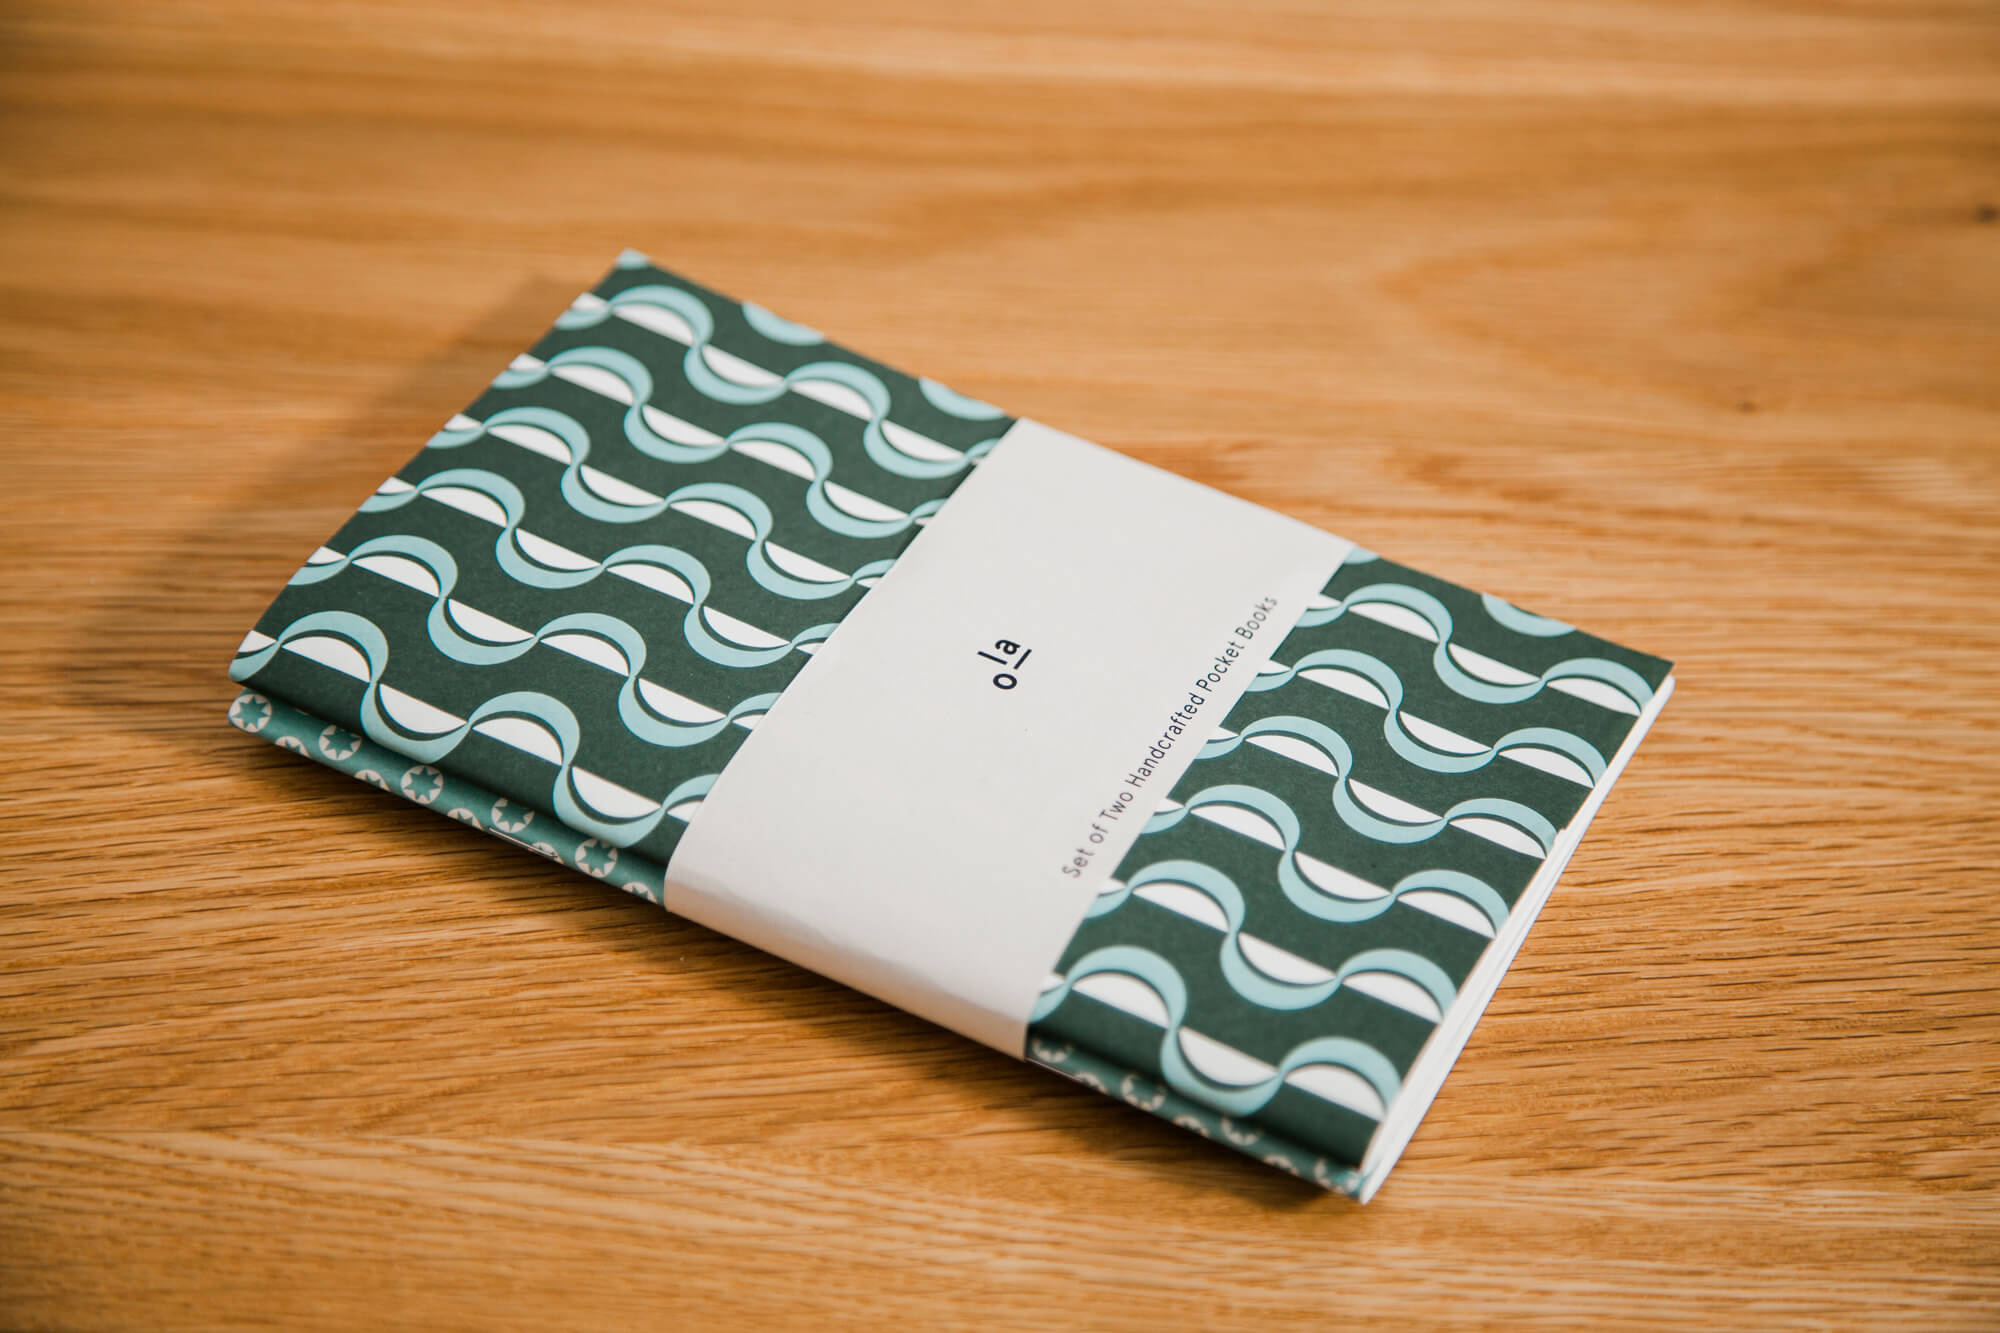 Set of 2 Handcrafted Pocket Books | Wave & Tiny Stars Prints | Plain Pages | by Ola - Lifestory